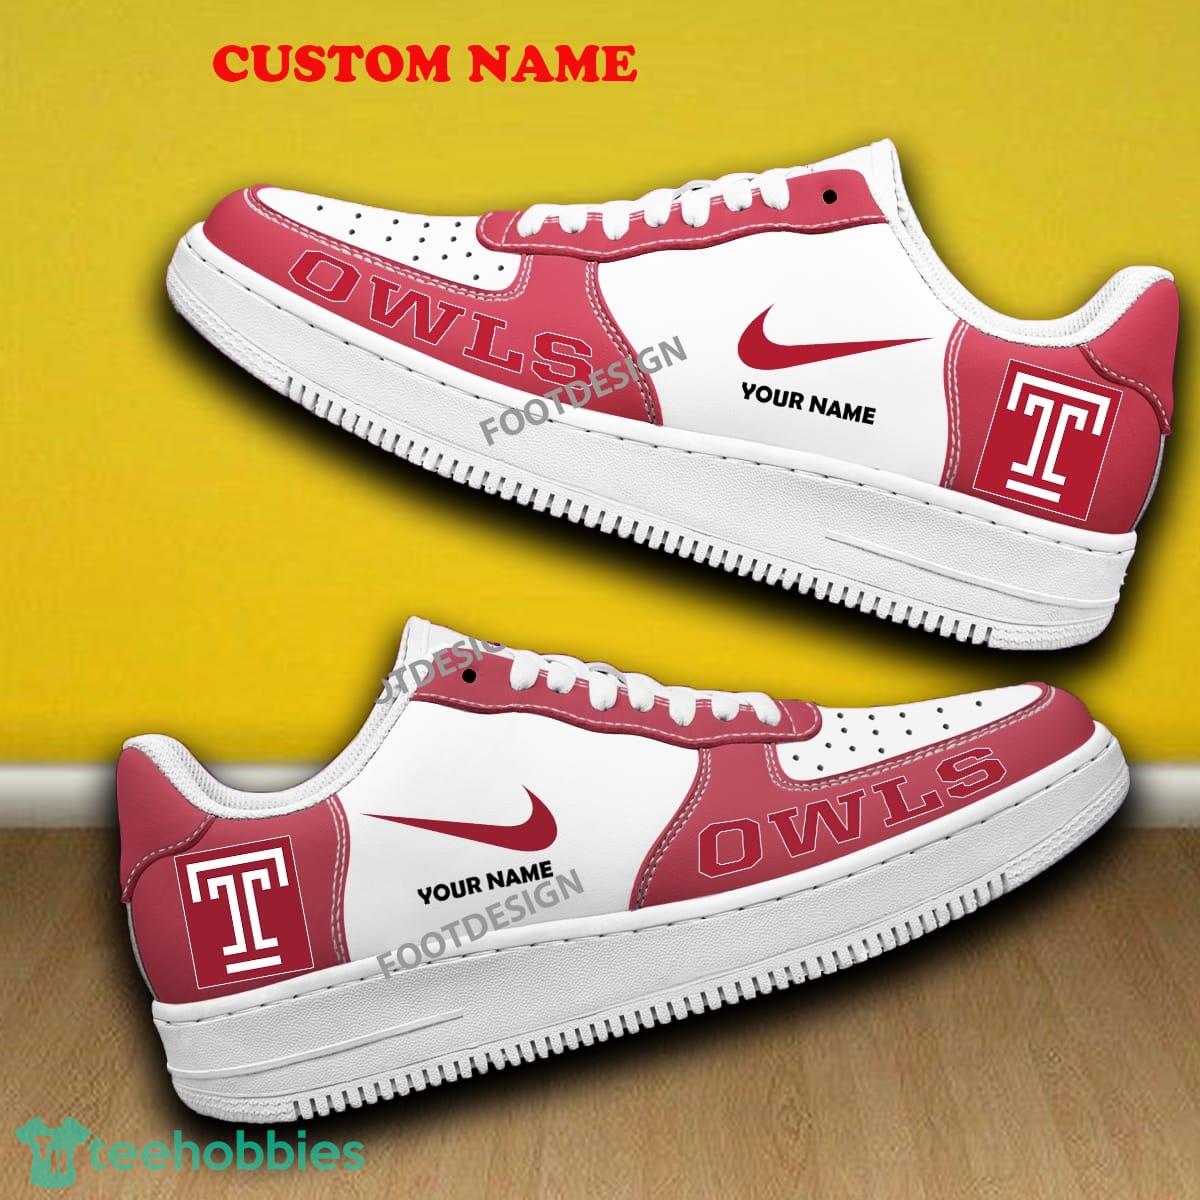 Custom Name Temple Owls Air Force 1 Sneaker All Over Print Gift - Custom Name Temple Owls Air Force 1 Sneaker All Over Print Gift